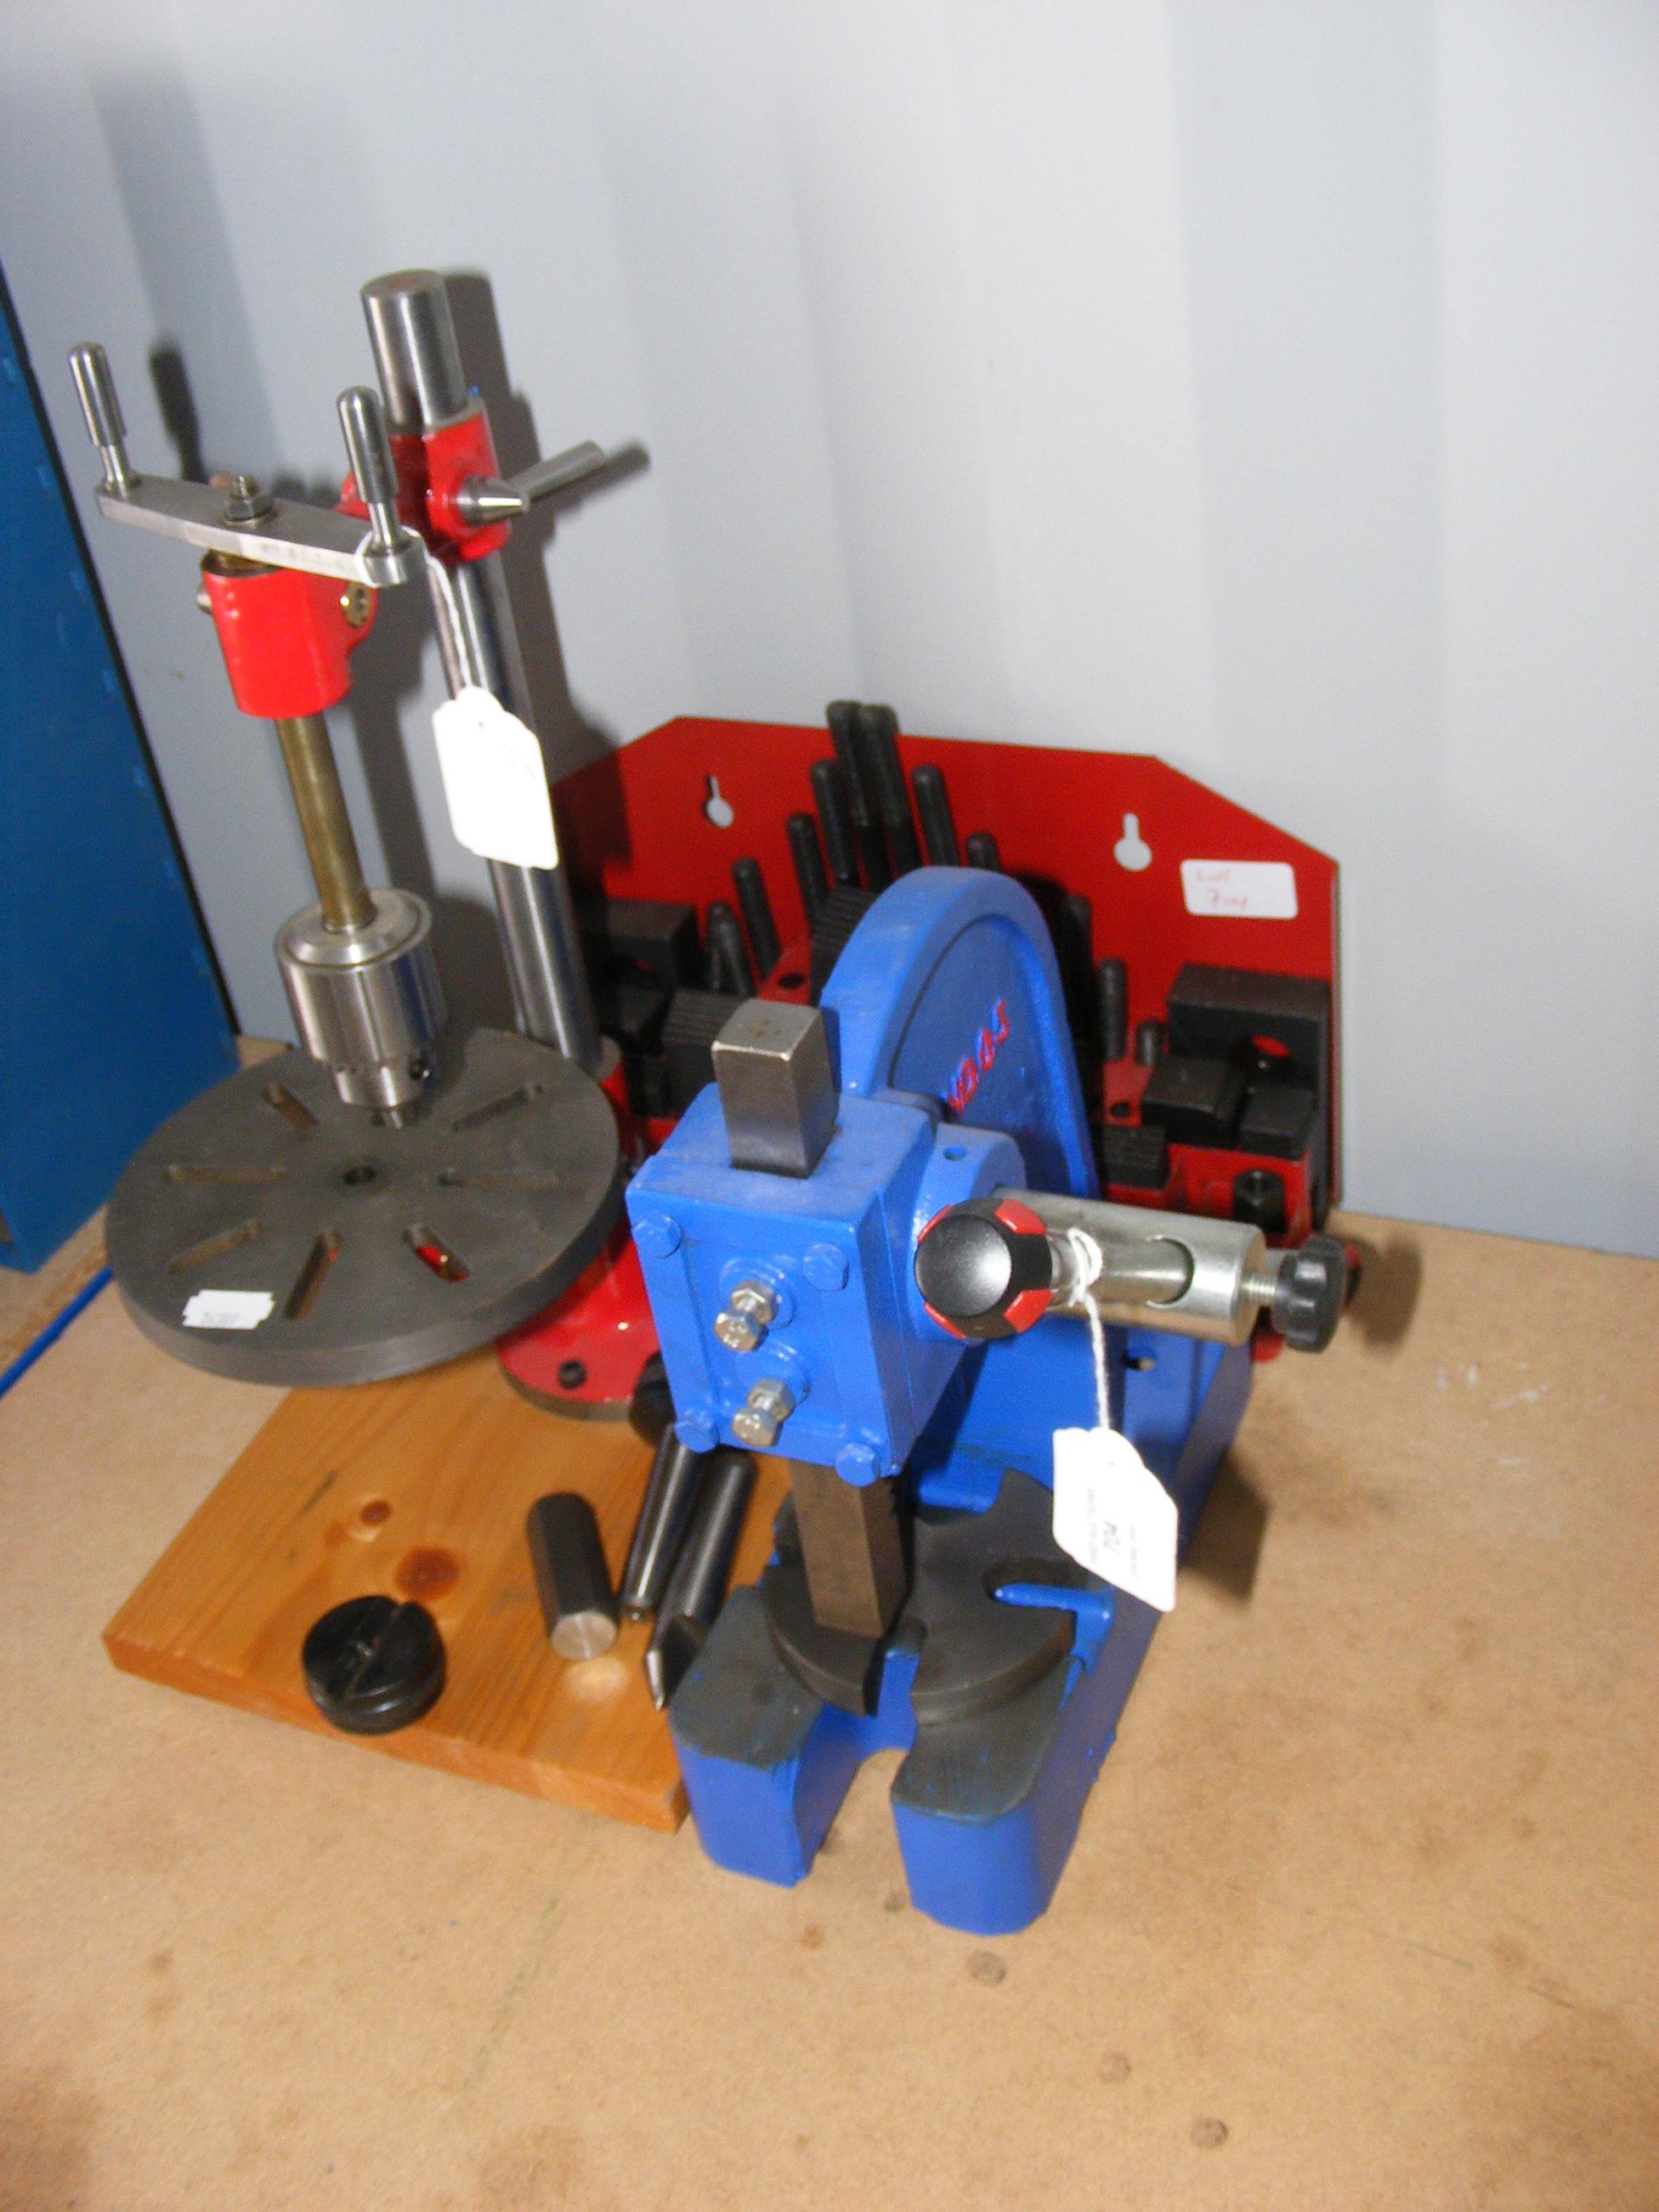 A hand drill and press, together with tools